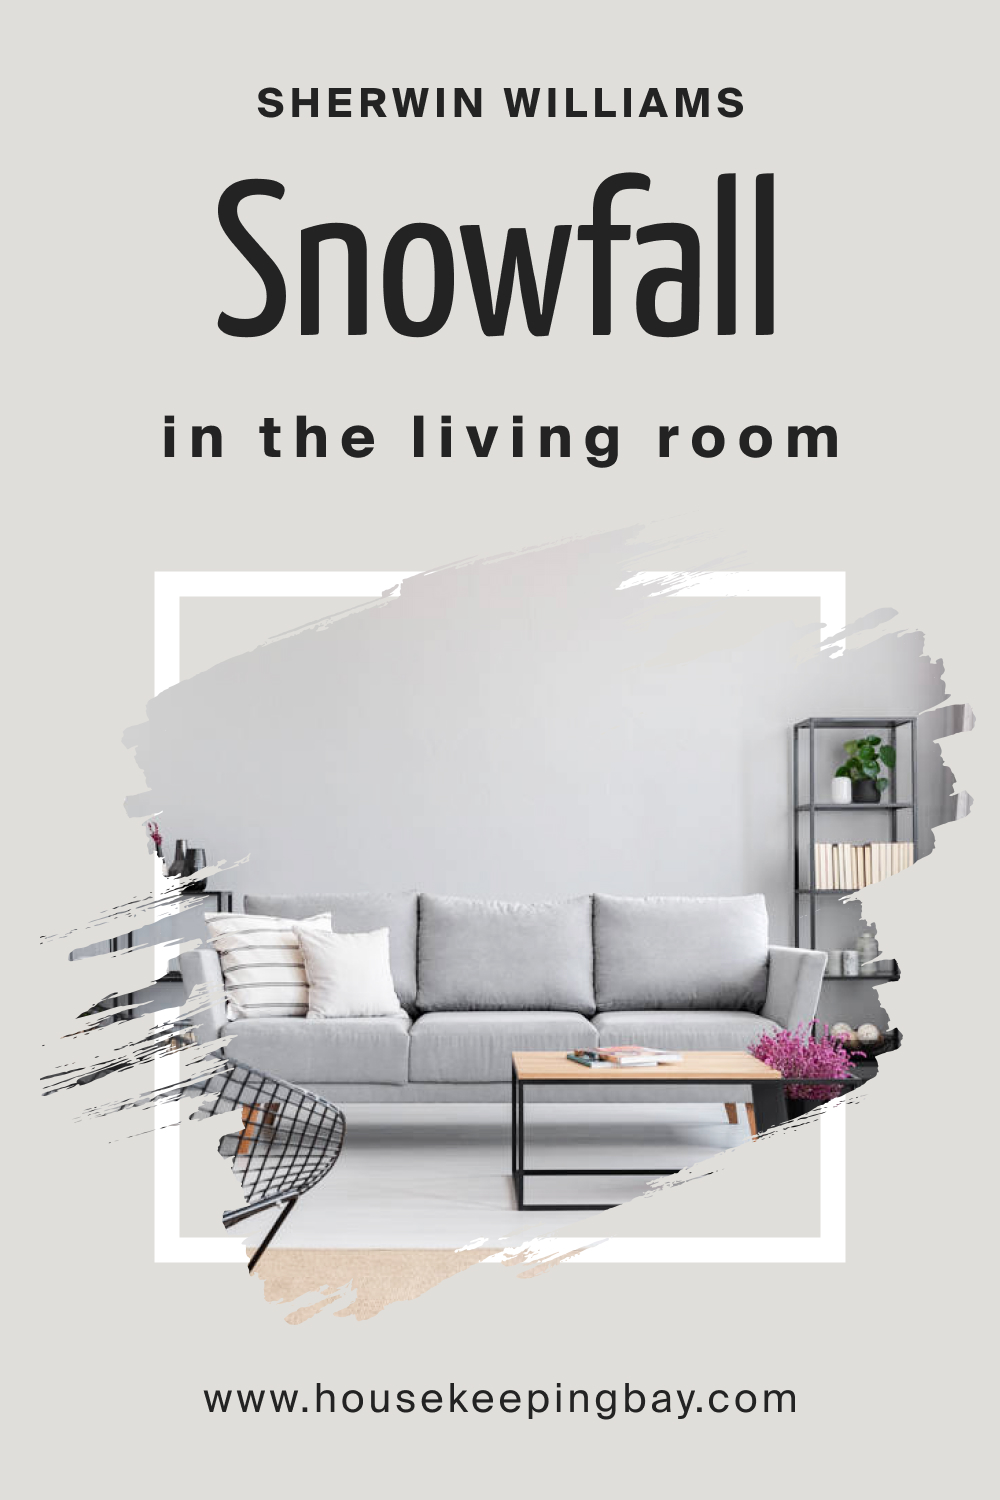 Sherwin Williams. Snowfall In the Living Room